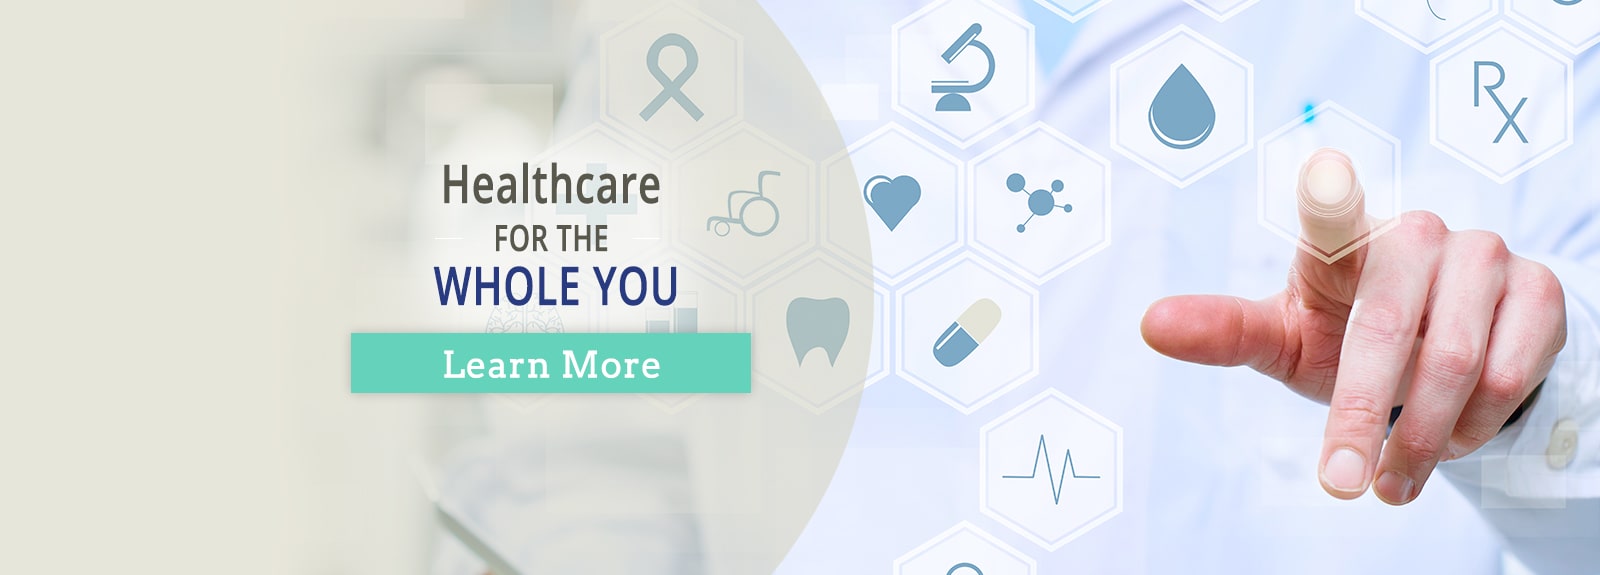 Healthcare for the WHOLE YOU. Learn More.